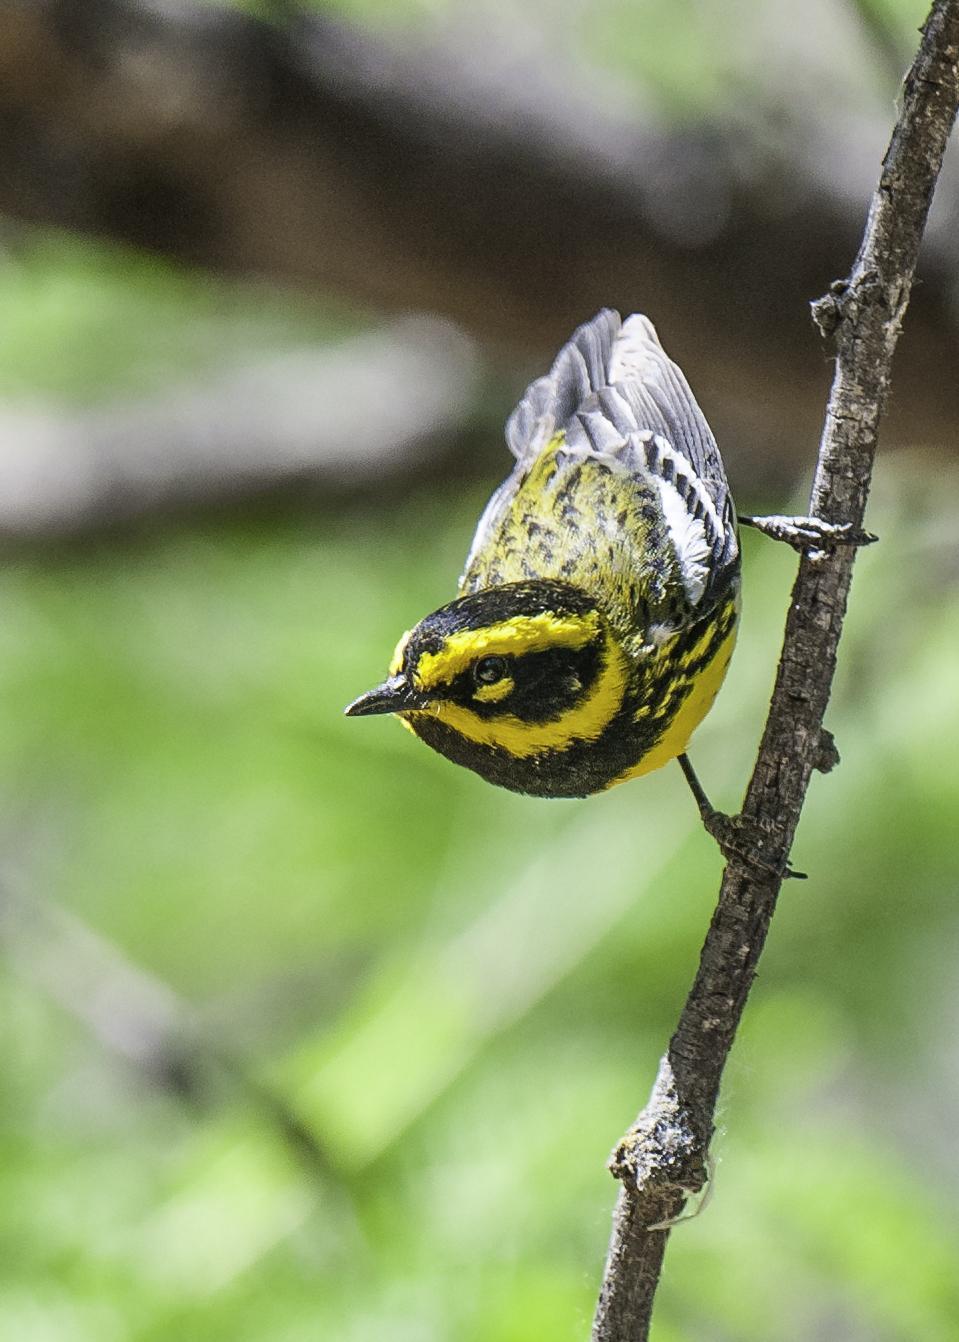 Townsend's Warbler Photo by Mason Rose